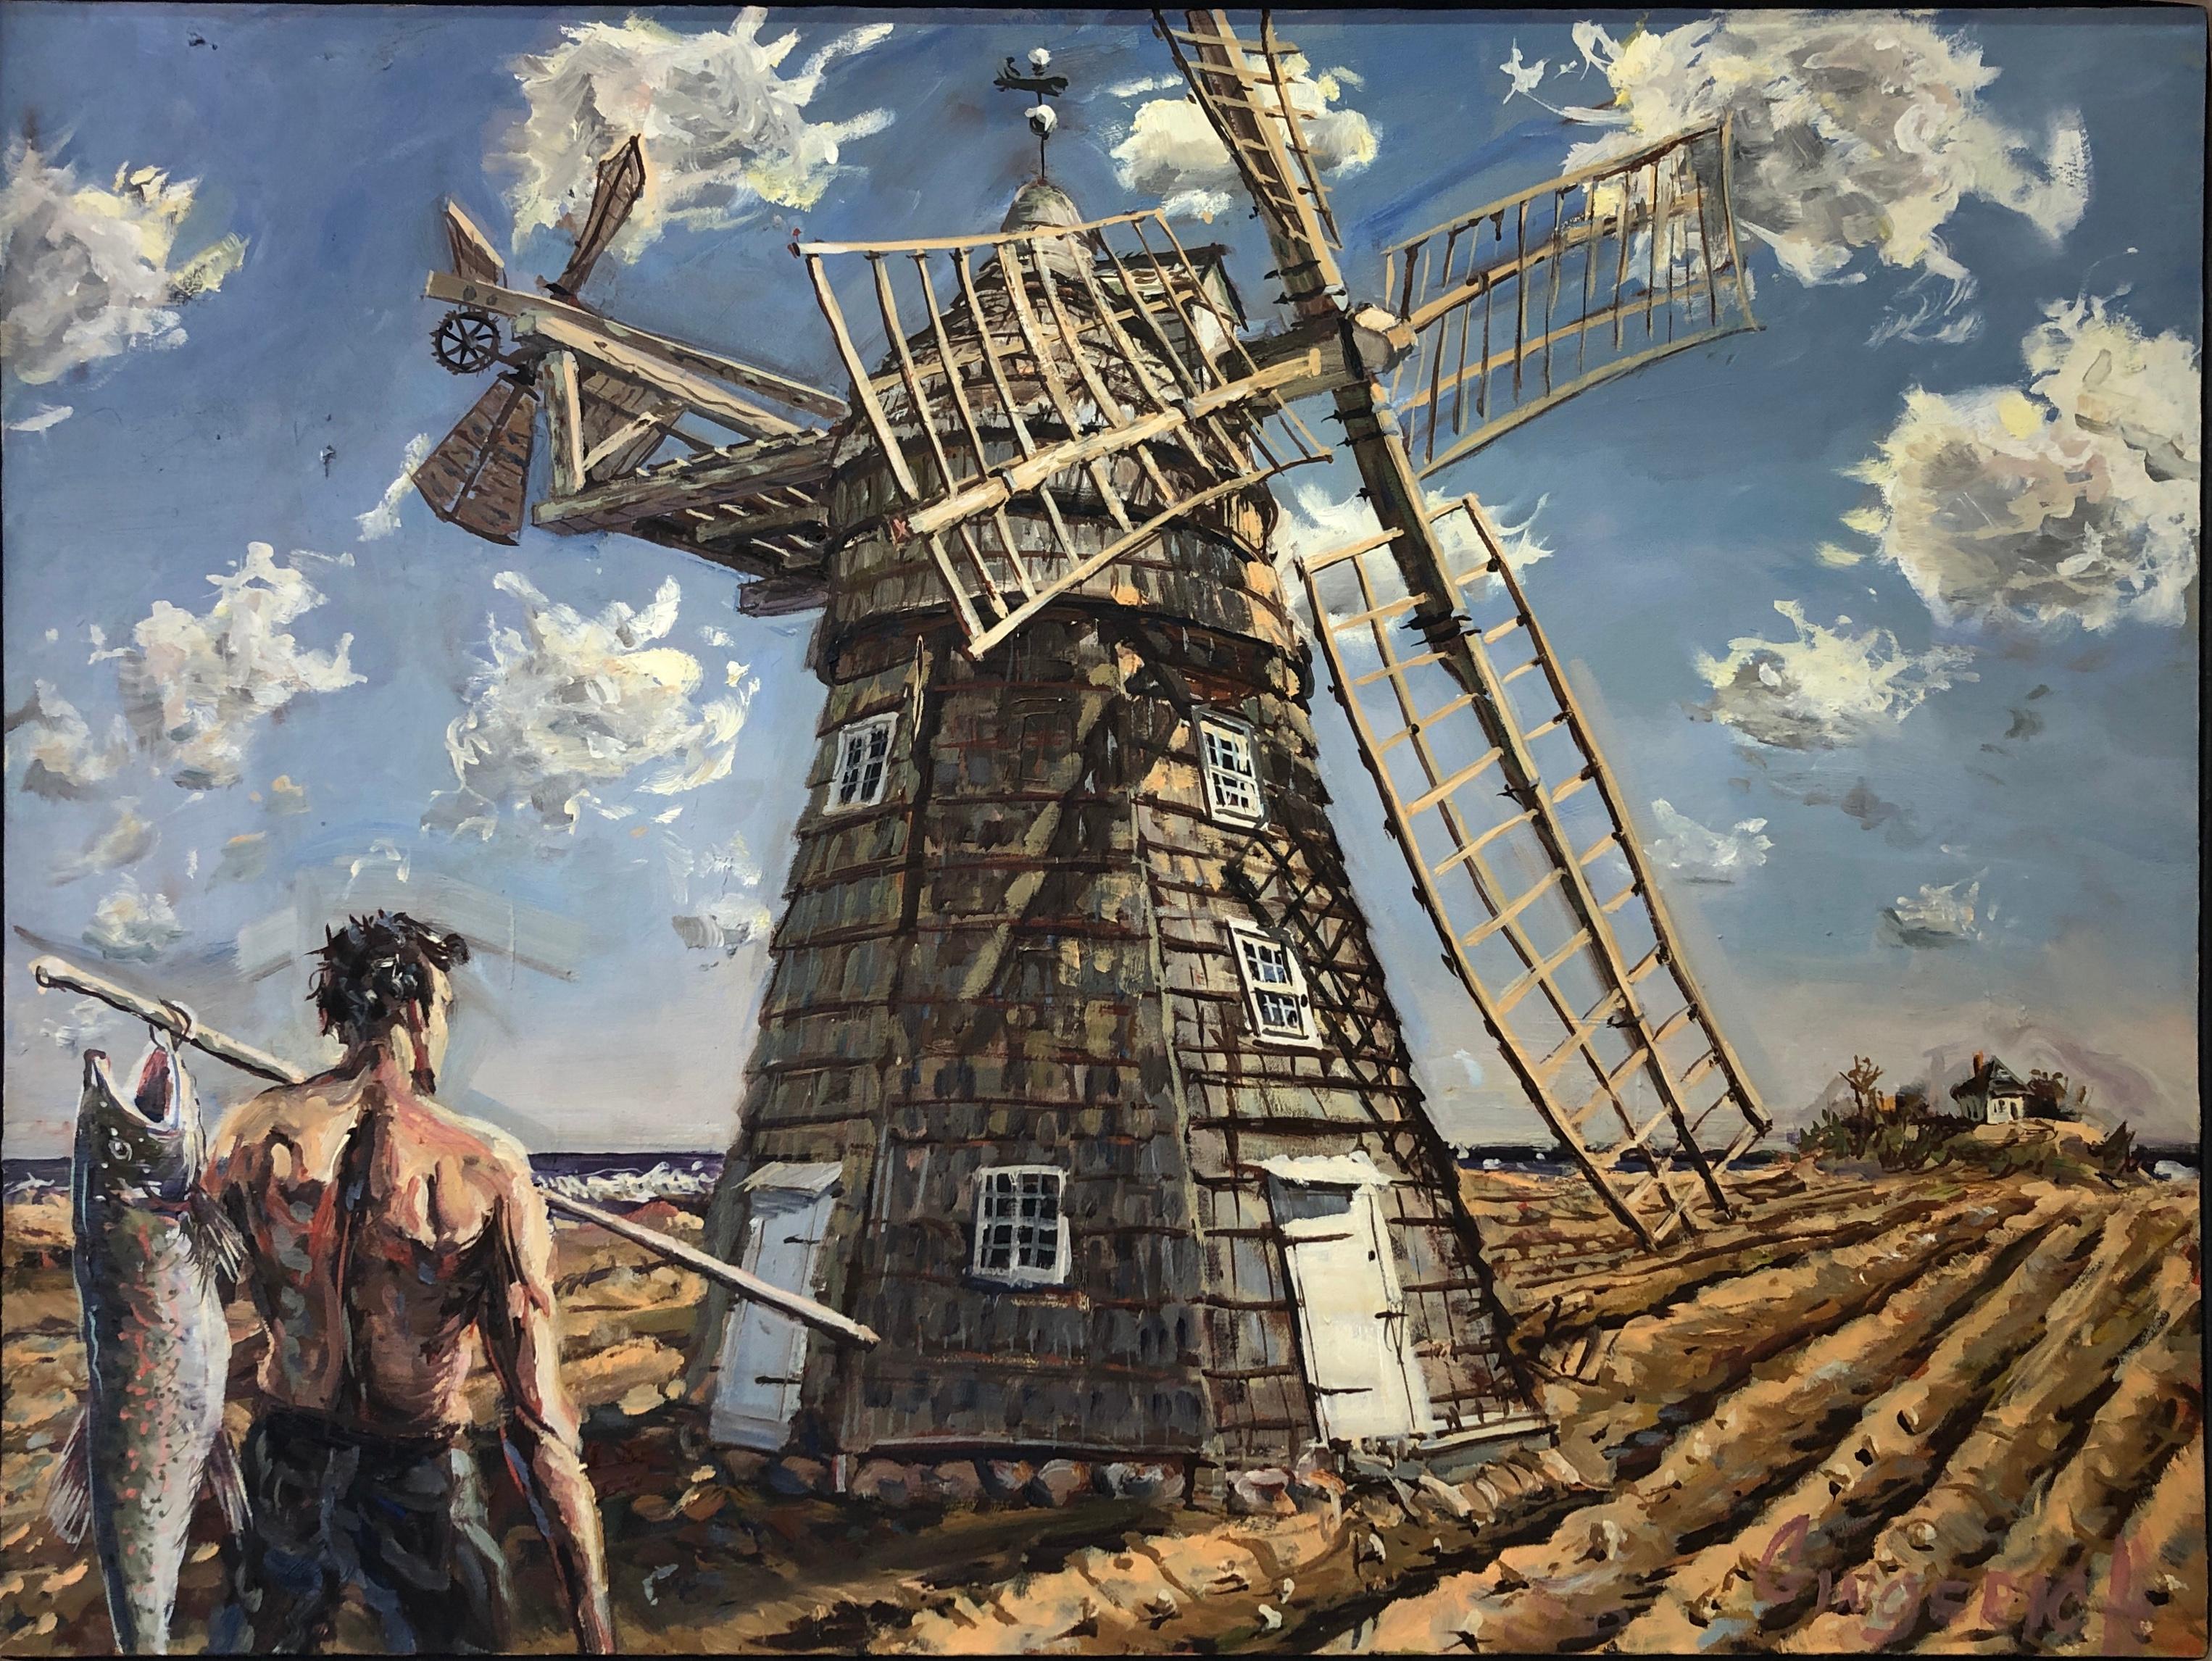 Jim Gingerich Landscape Painting - JIM GINGERICH "Windmill" oil painting landscape with shirtless figure in field